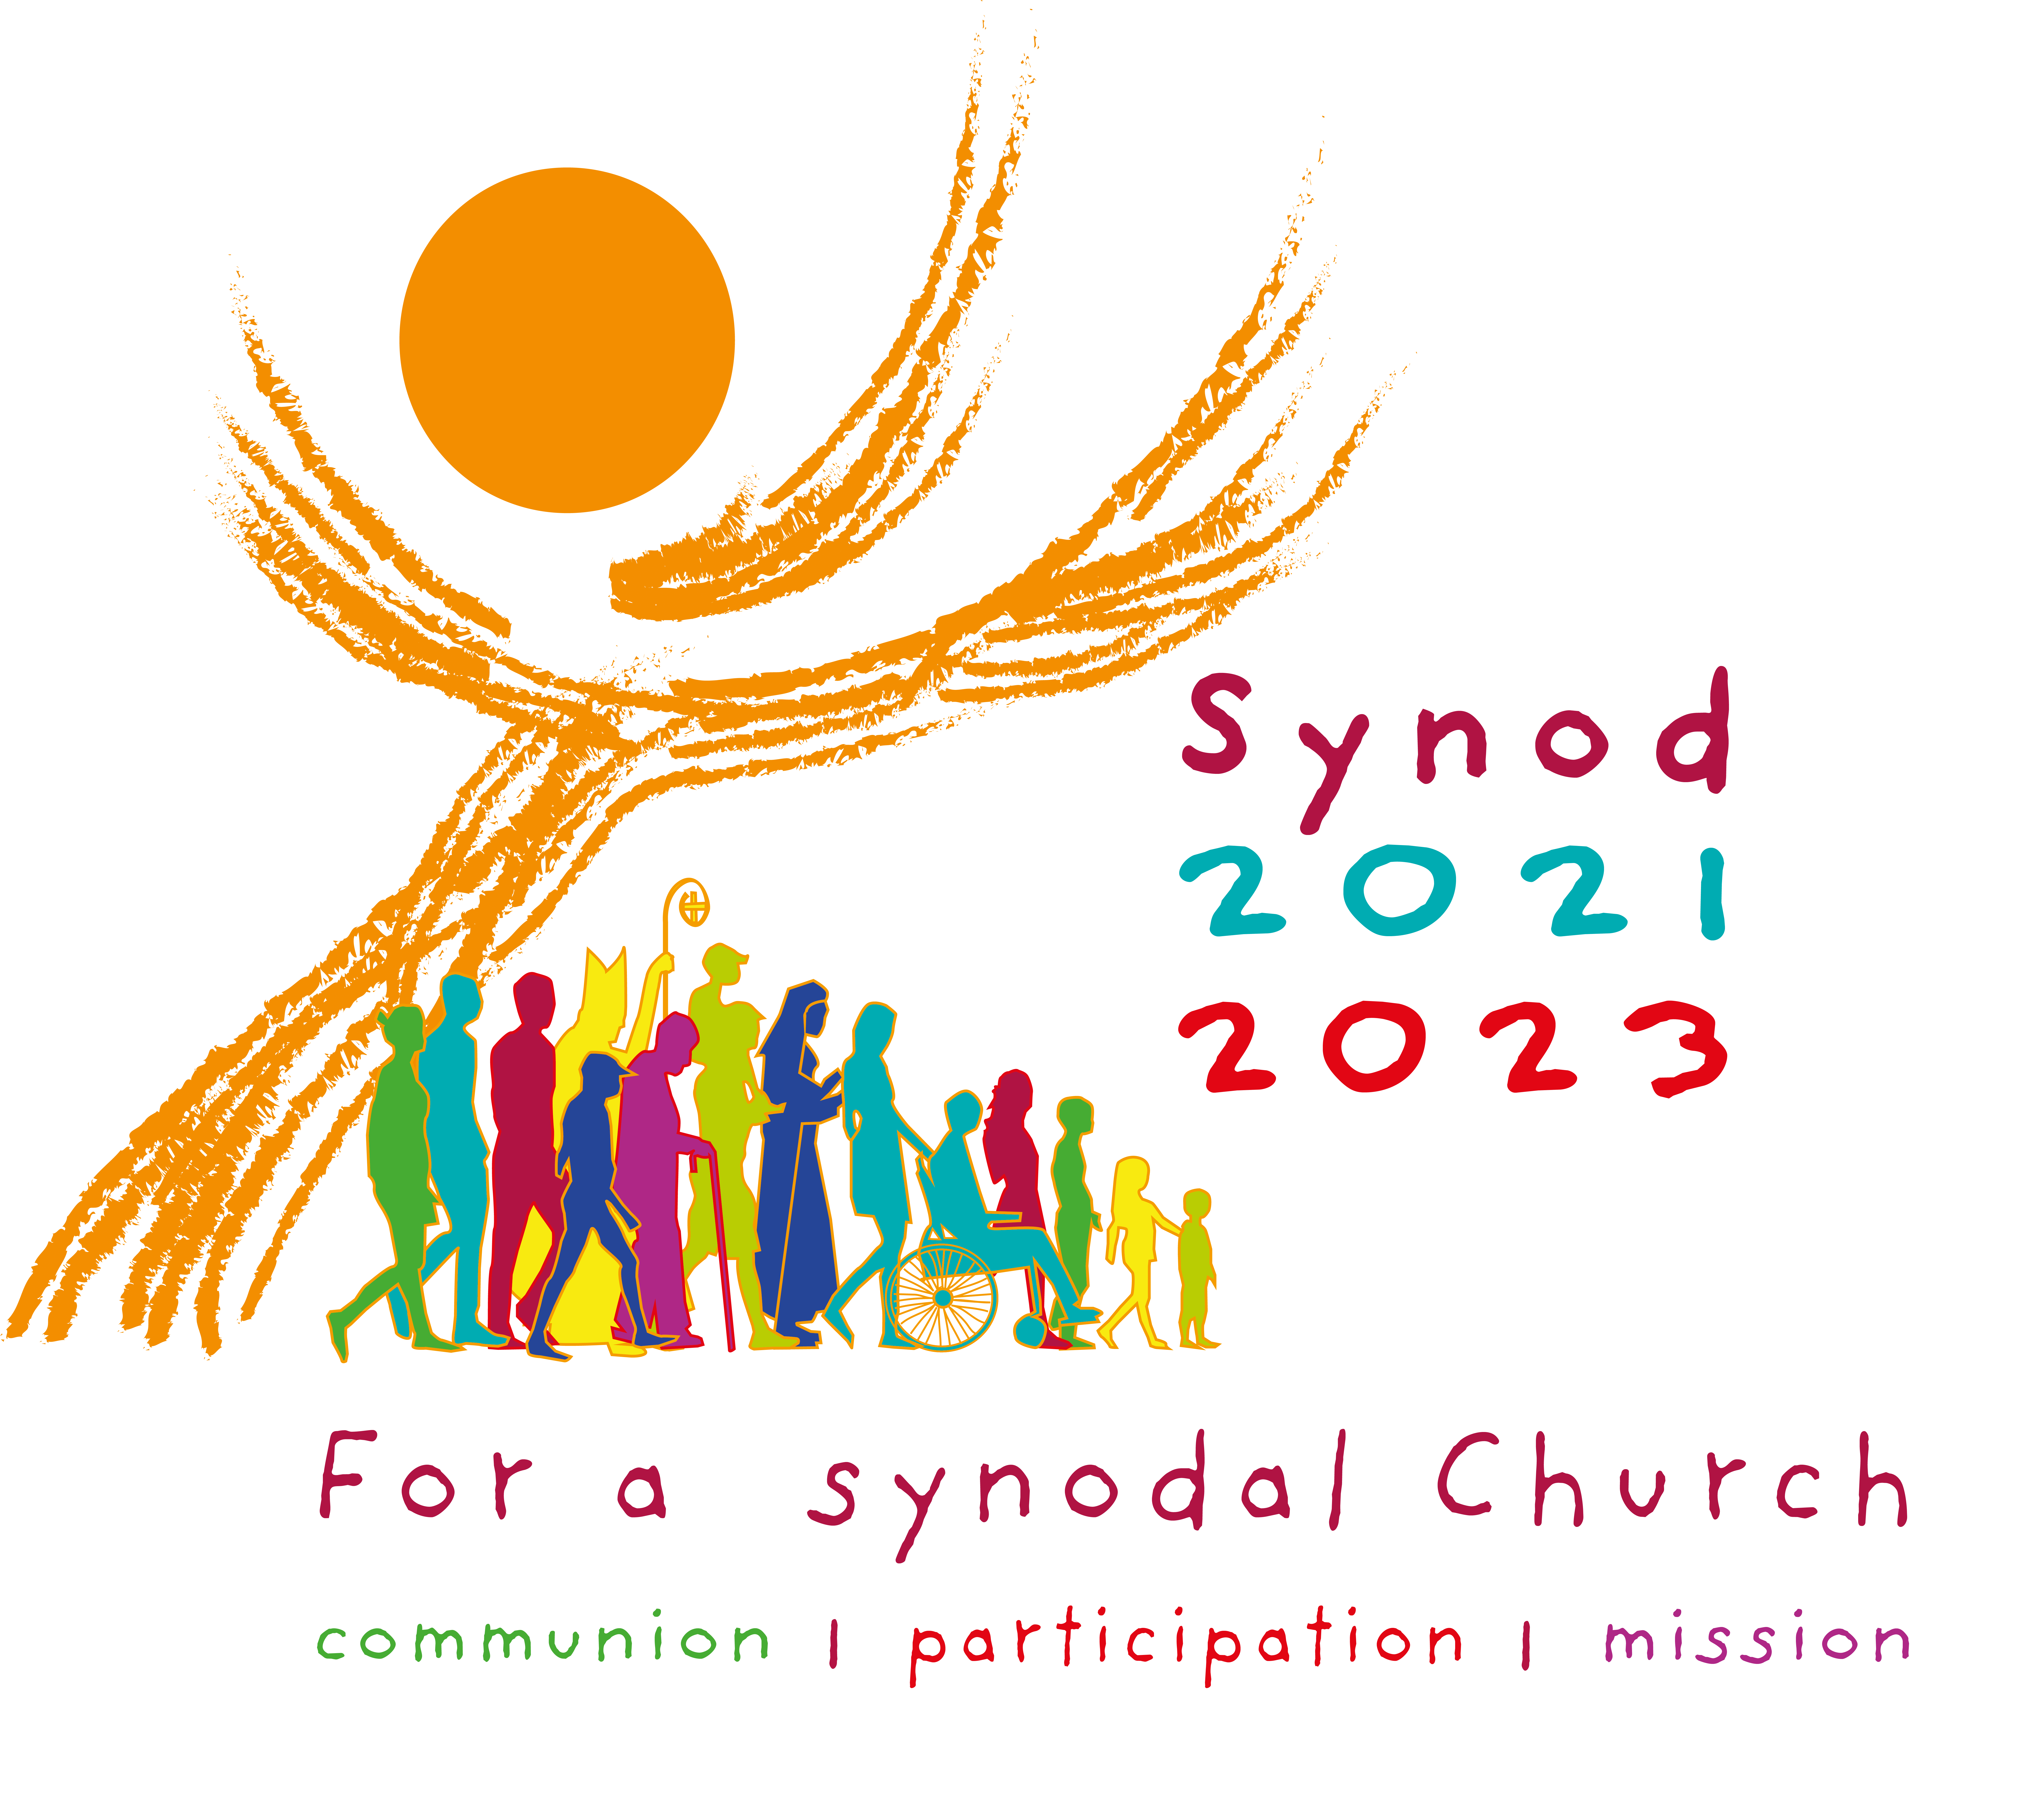 Journeying Together: the synod process